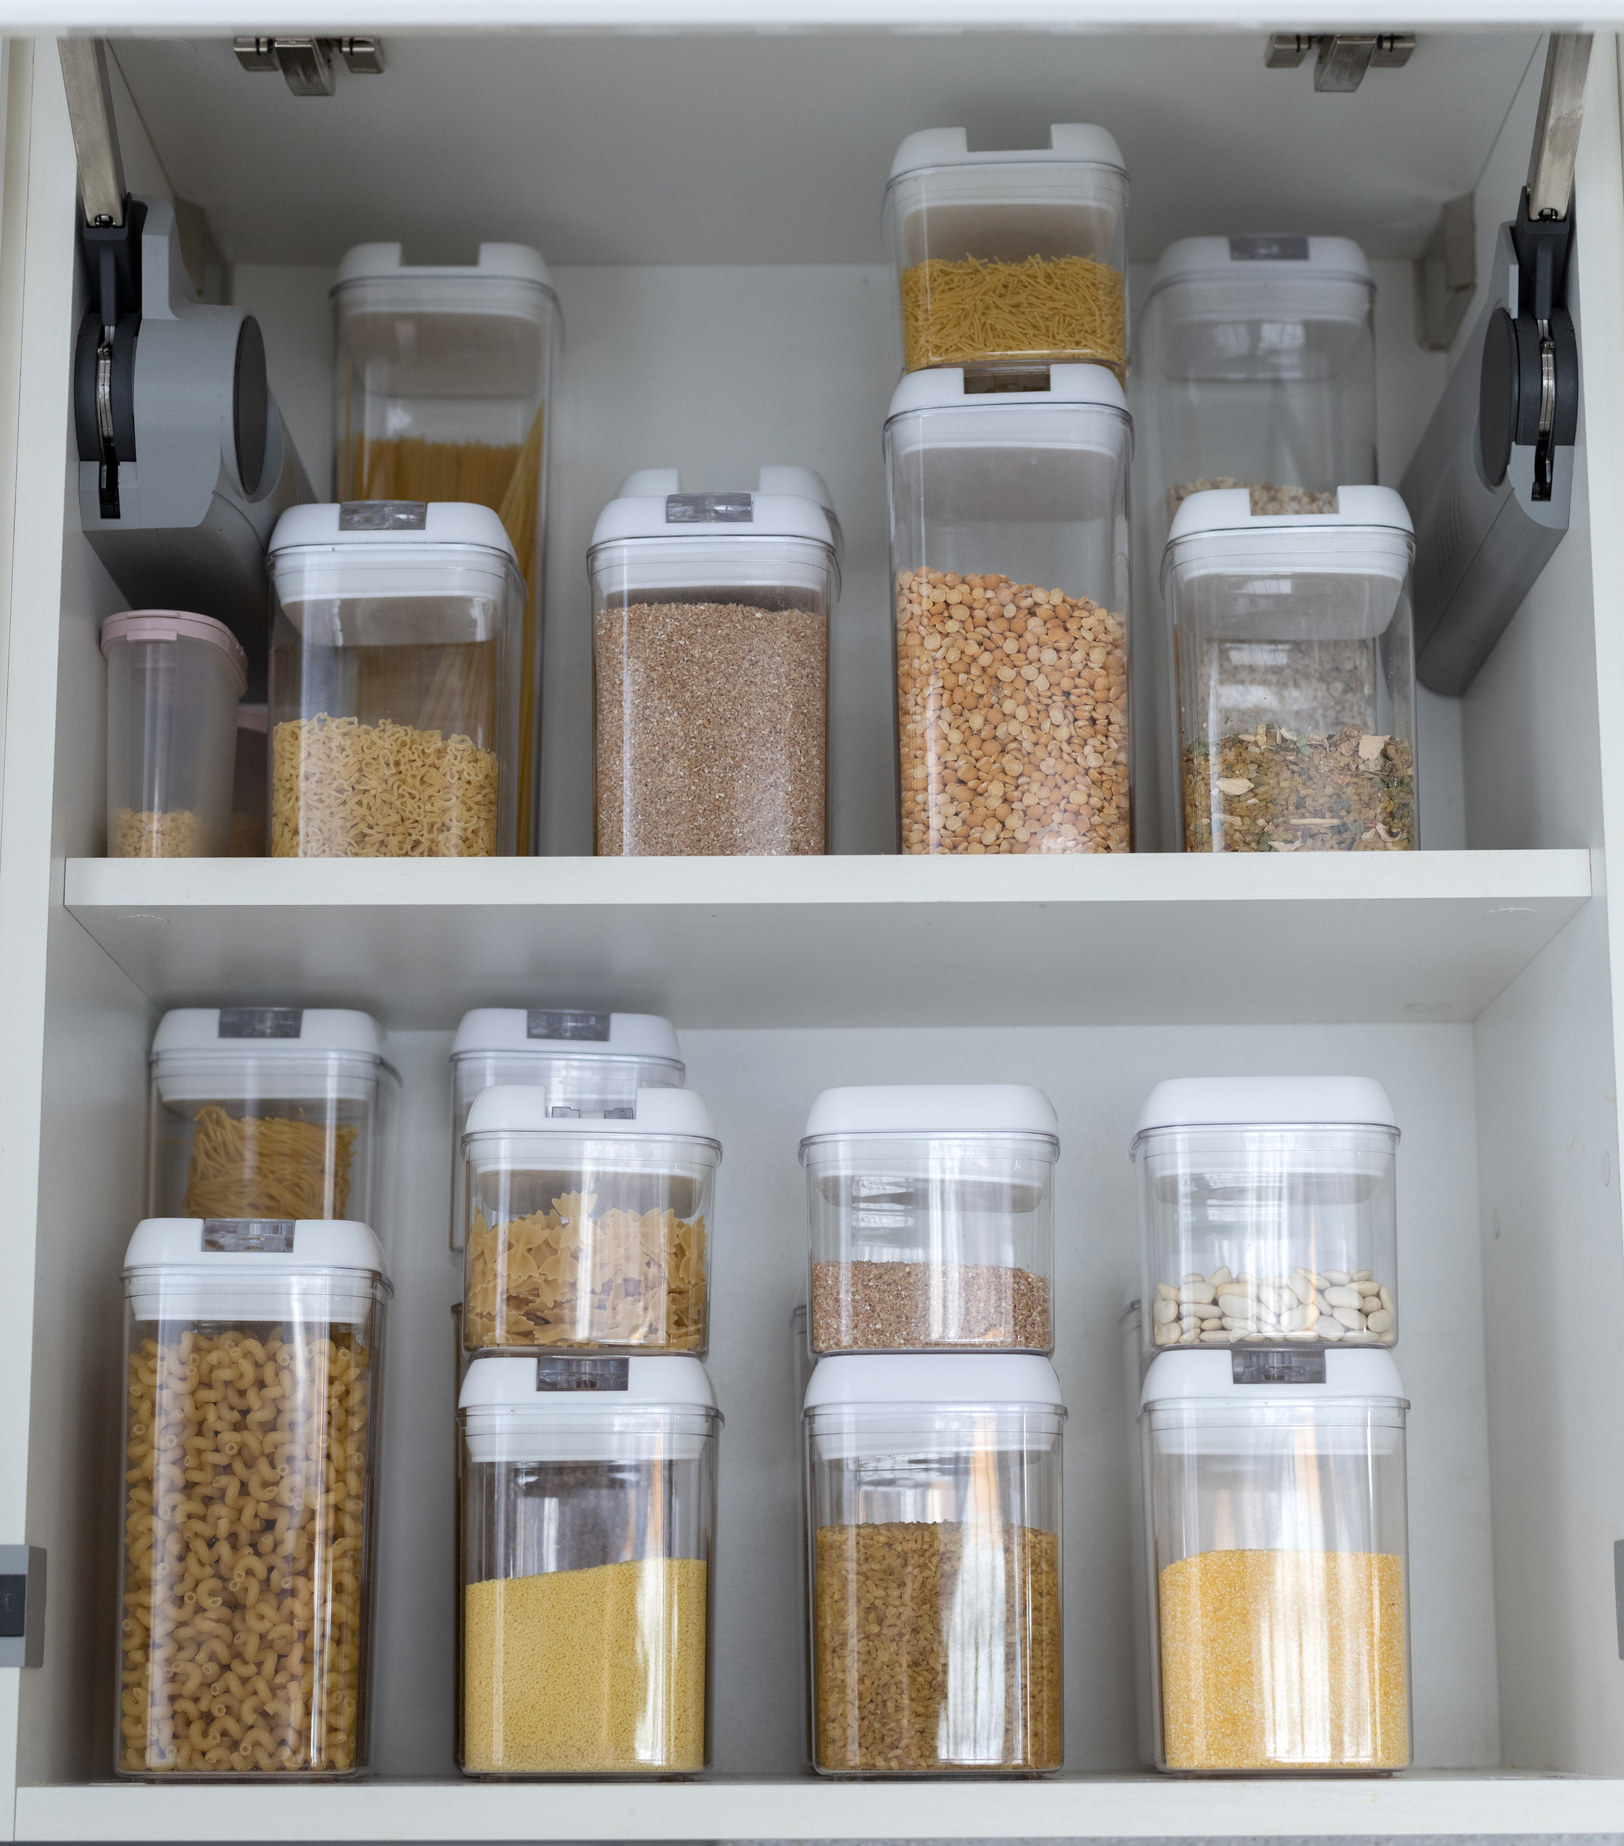 Food storage containers filled with cereals in the kitchen pantry.